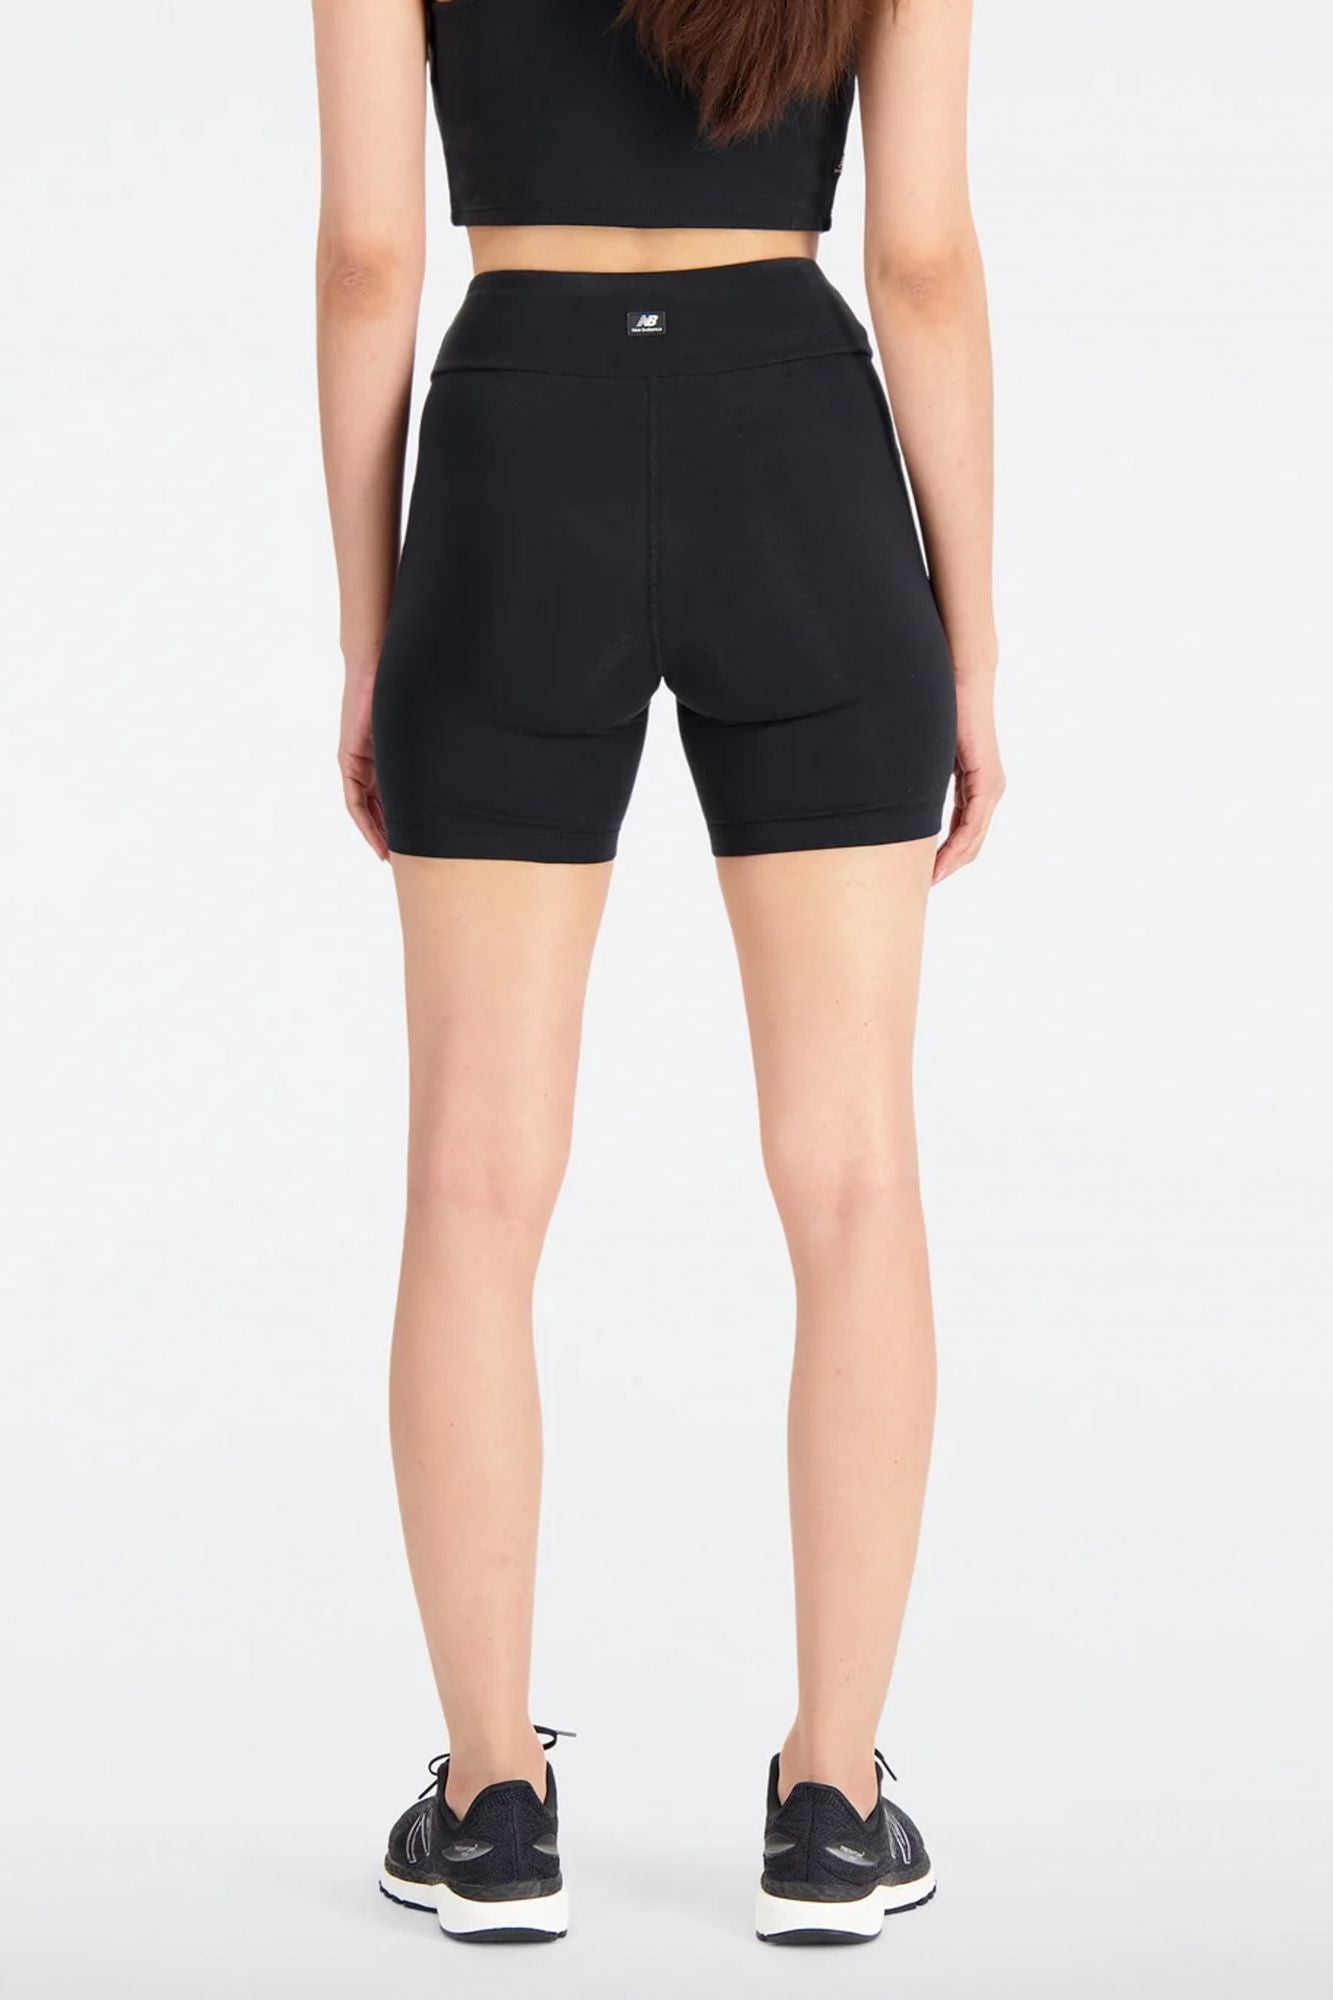 NEW BALANCE FITTED SHORT en color NEGRO (2)